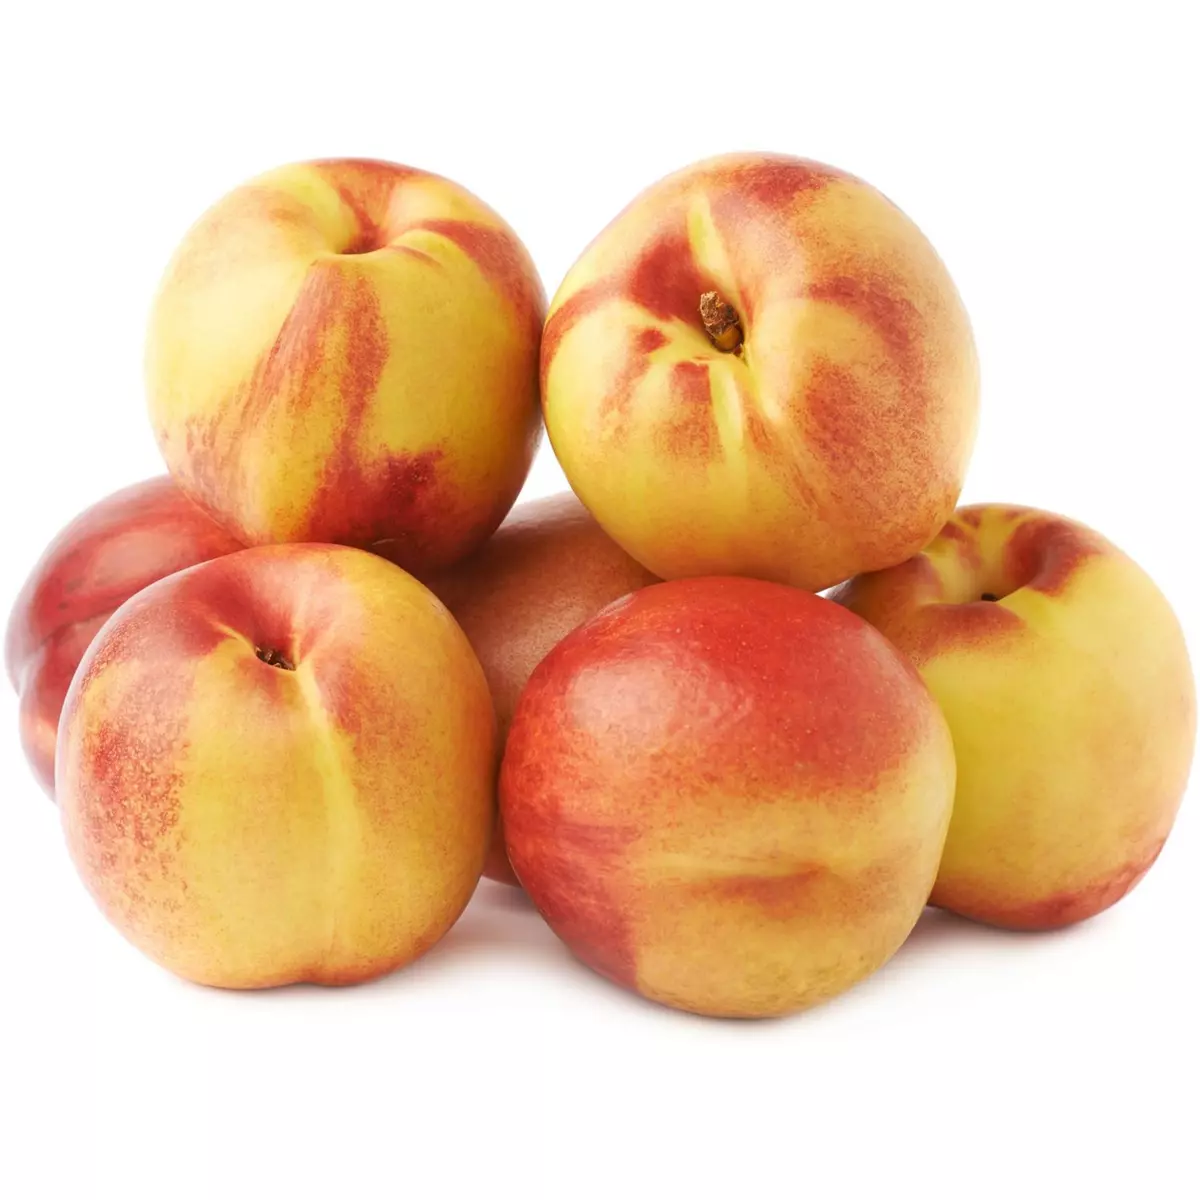 Nectarines blanches corses 1kg